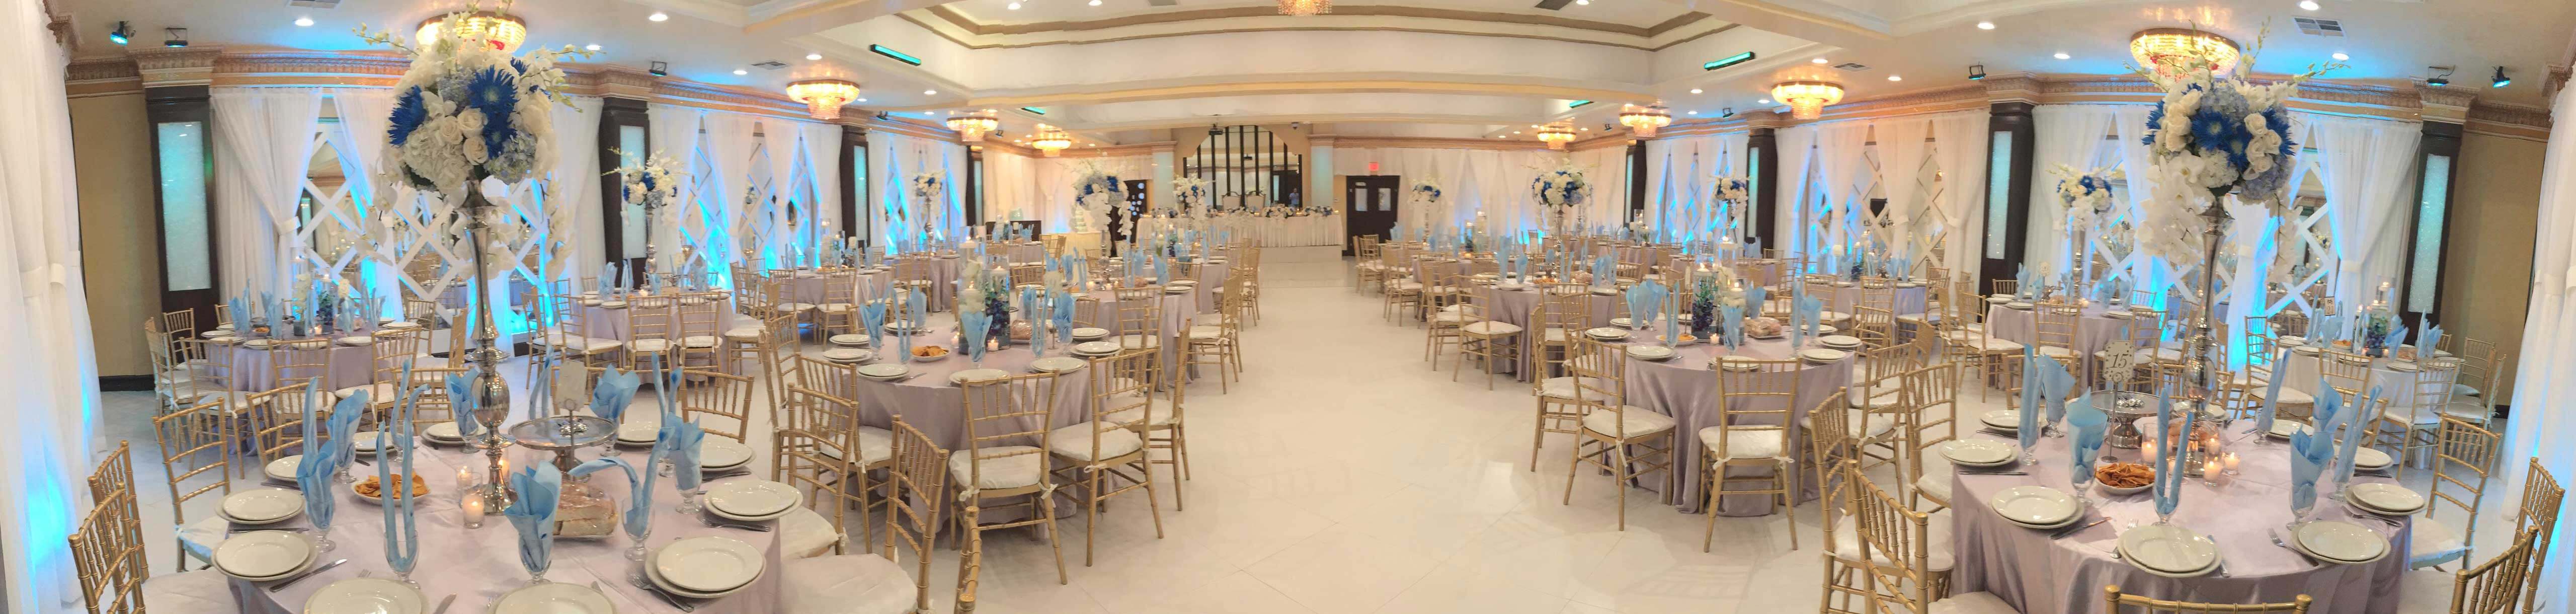 Sepan Banquet Hall in Glendale CA